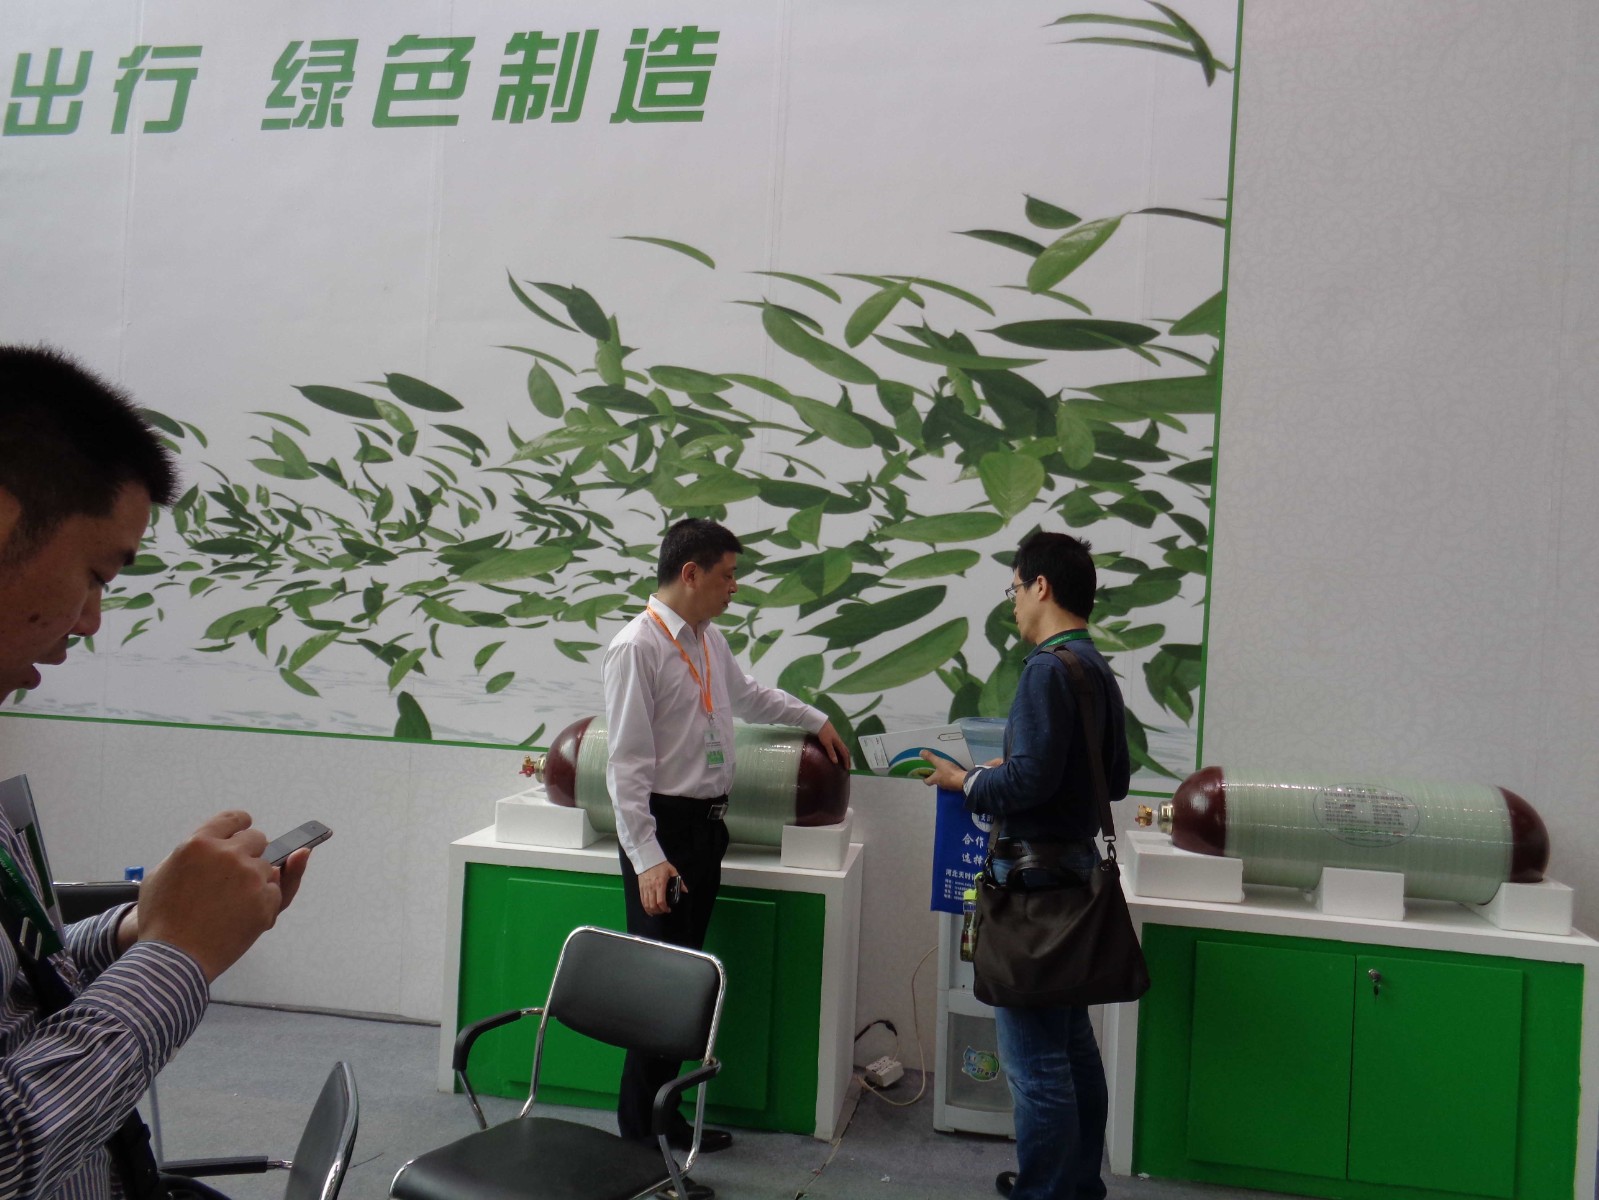 The 16th China International Natural Gas Vehicle and Gas Station Equipment Exhibition in 2015